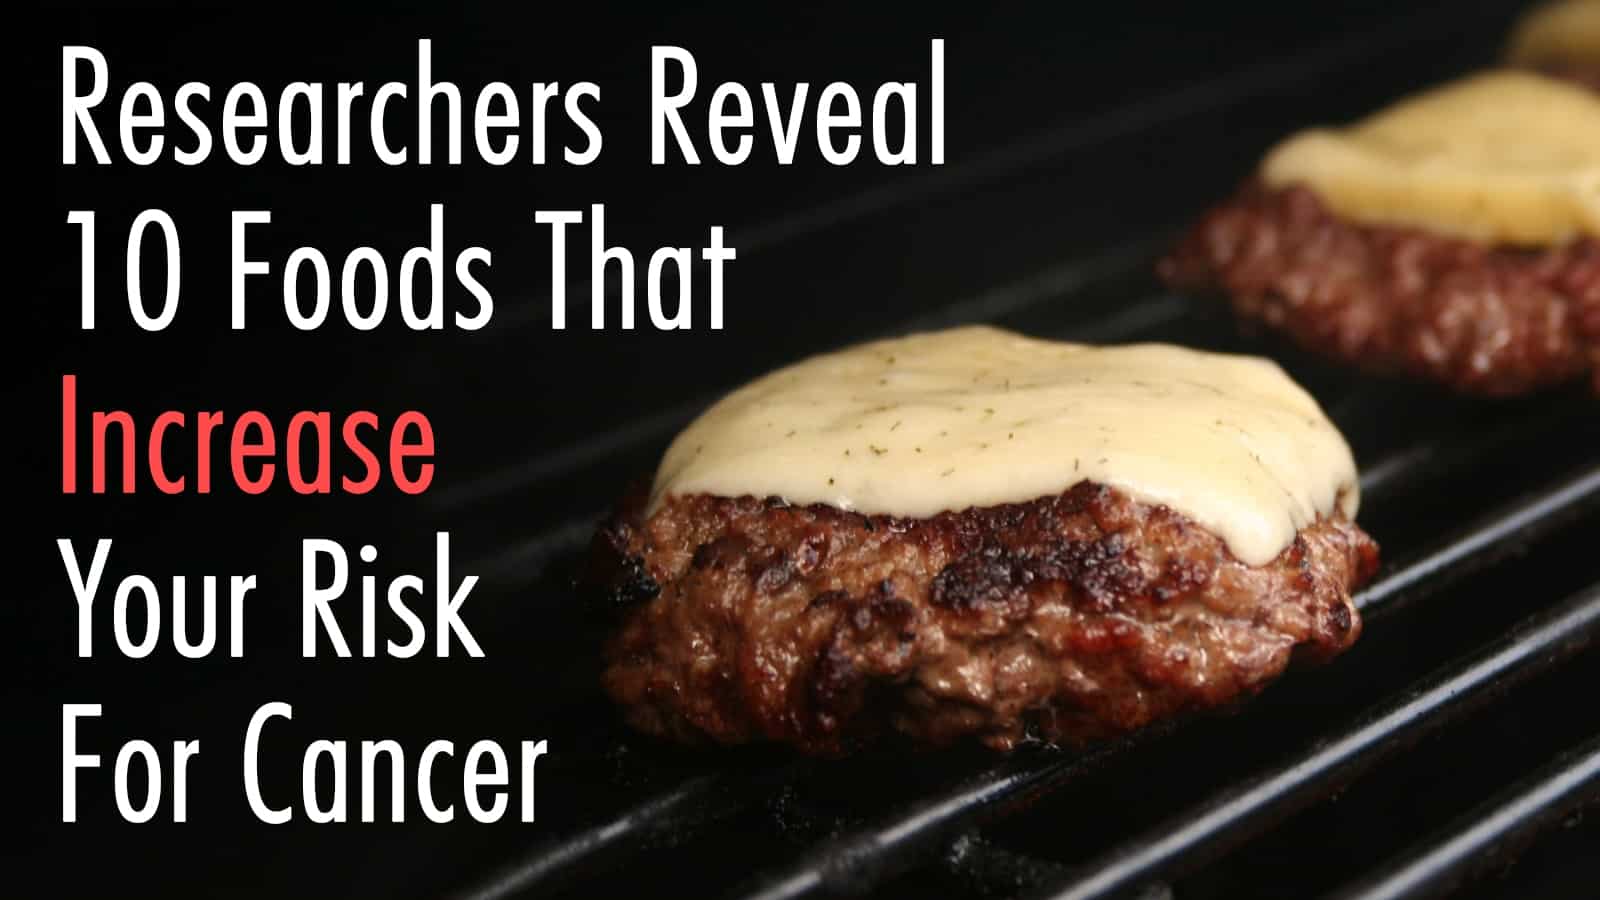 Researchers Reveal 10 Foods That Increase Your Risk For Cancer